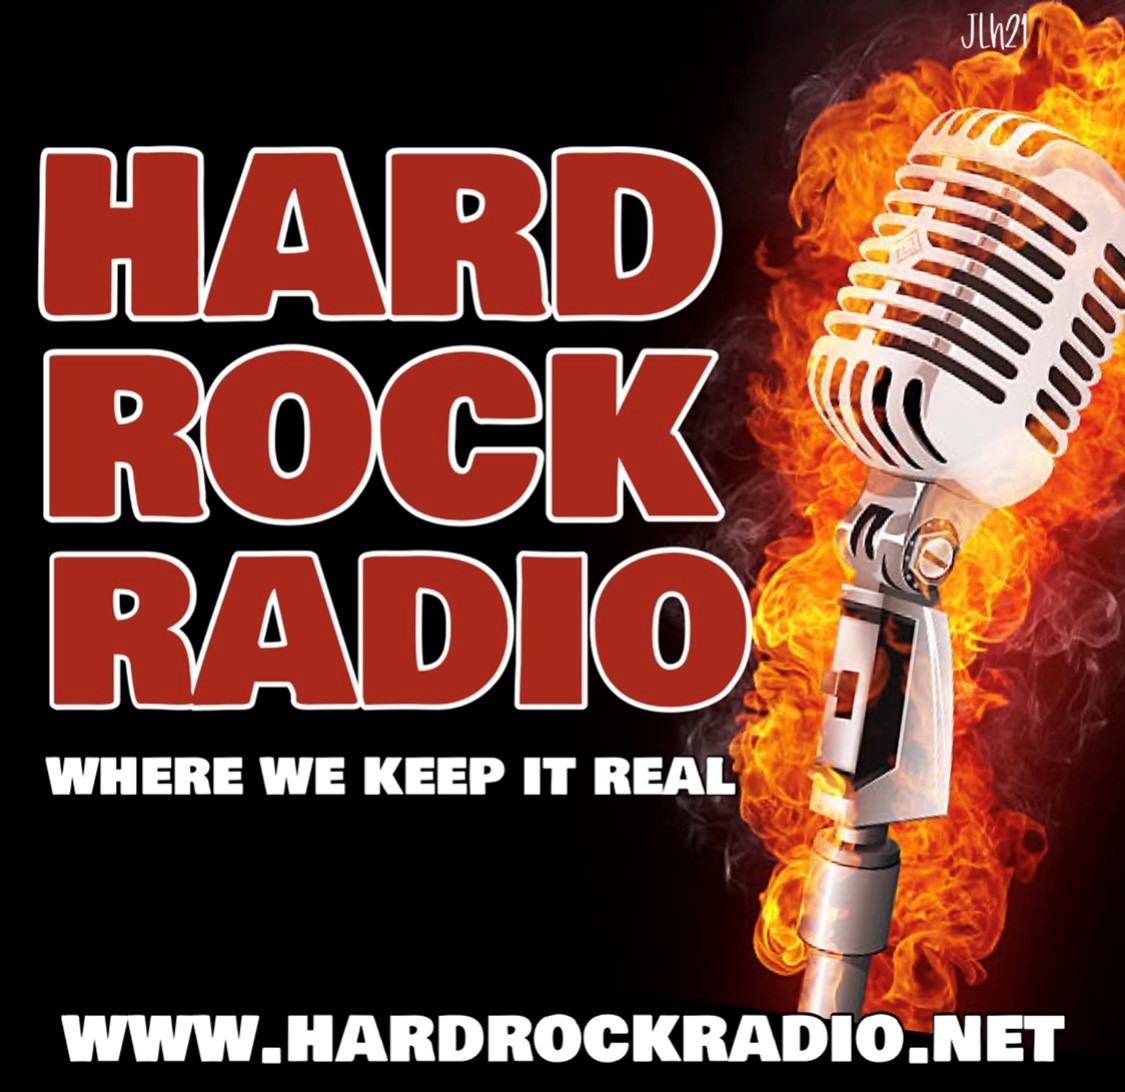 Art for Promo by Hard Rock Radio